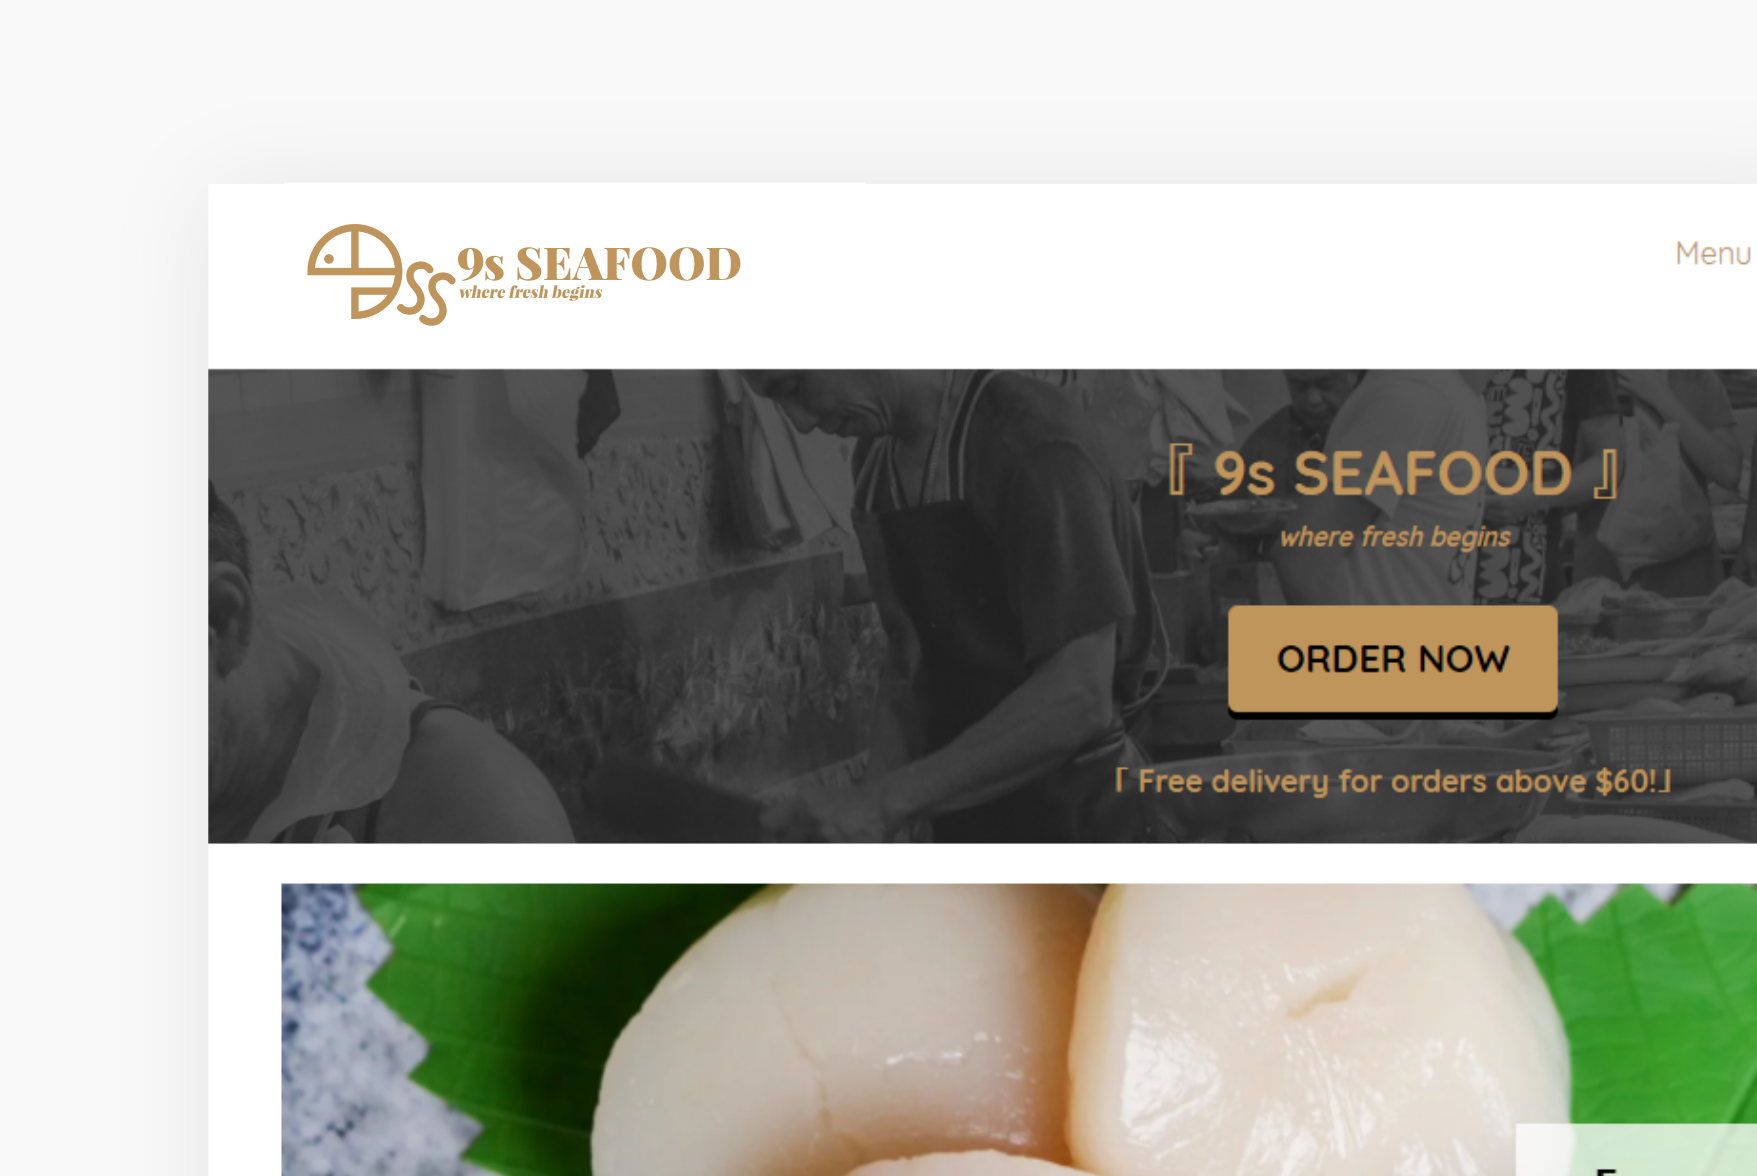 The 9s Seafood logo on their website